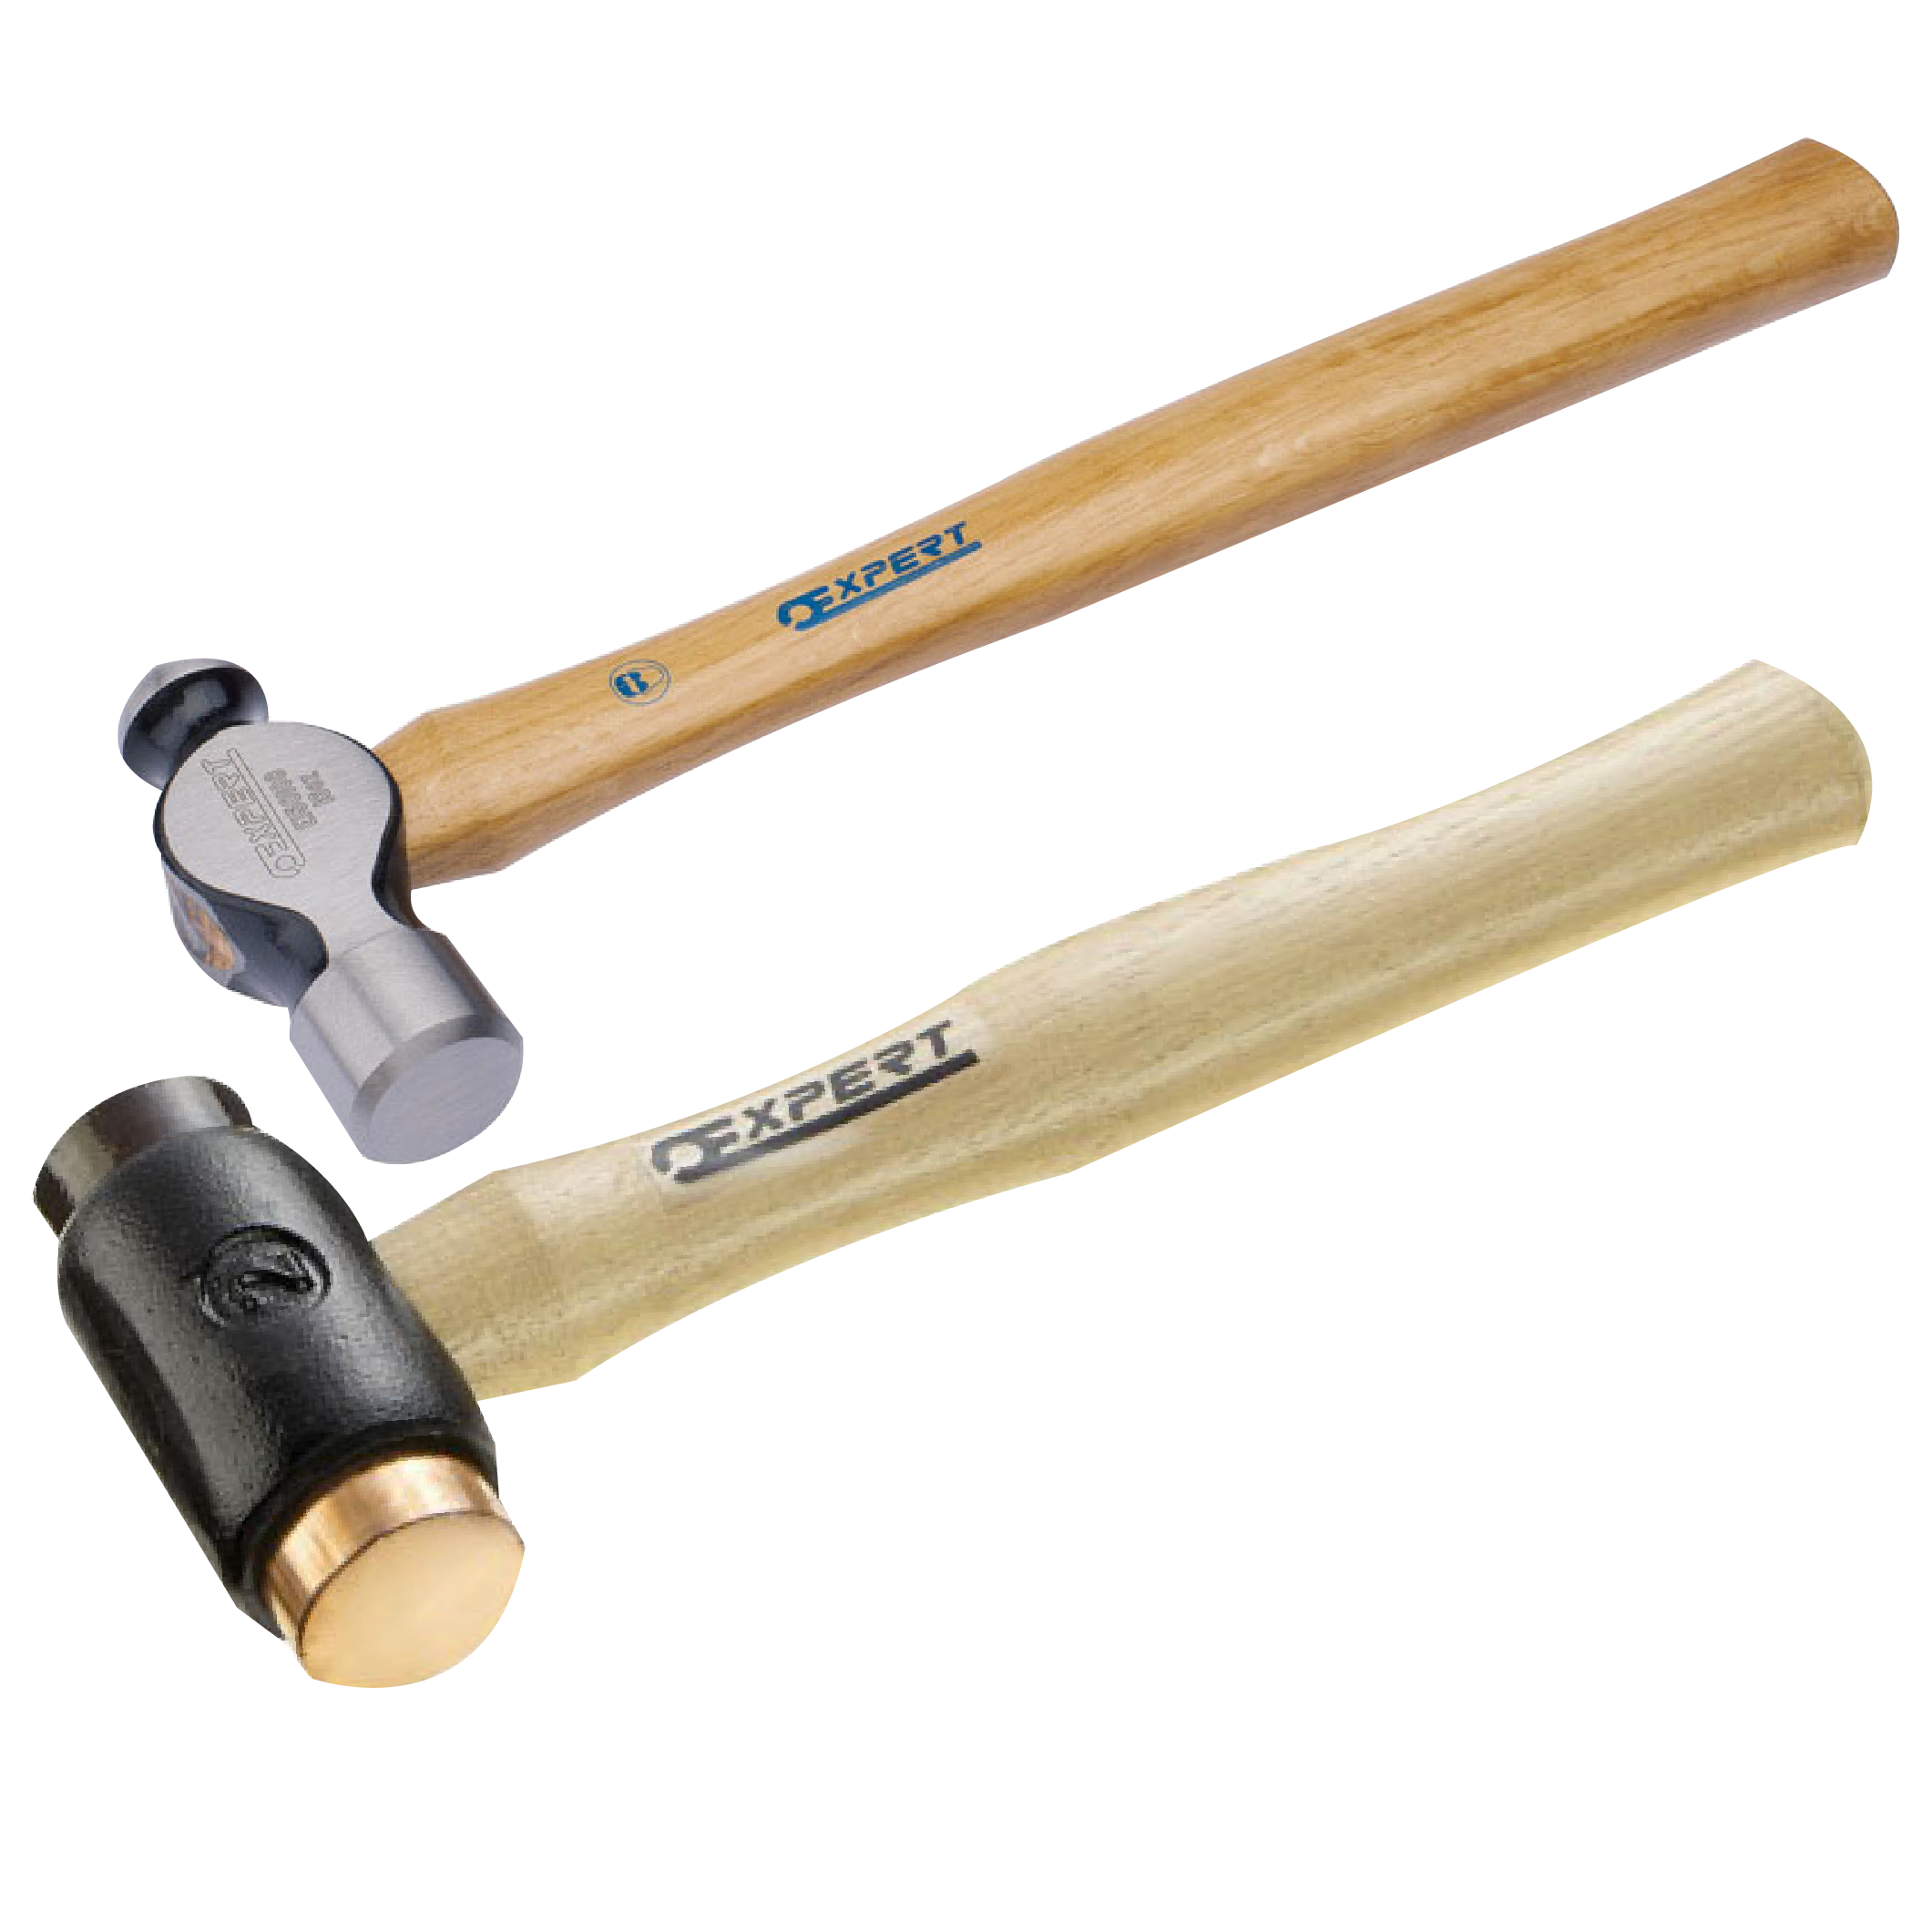 CURVED CLAW HAMMER WITH HARDWOOD HANDLE 12OZ PRO-MT206 - Promaker